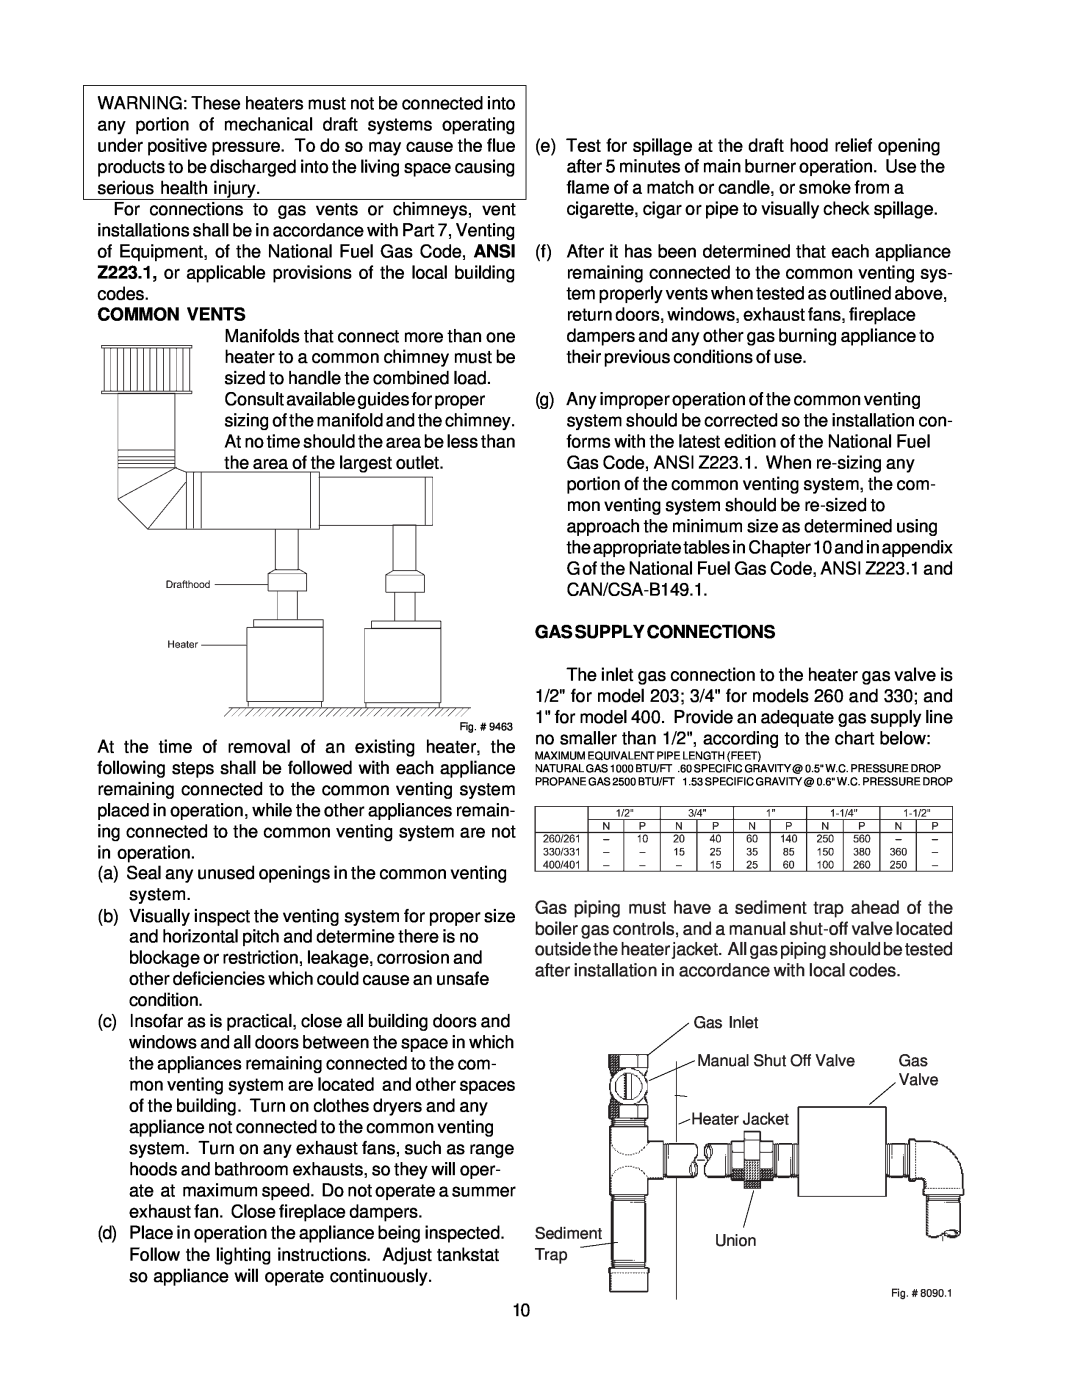 Raypak 260-401 manual Common Vents, Gas Supply Connections 